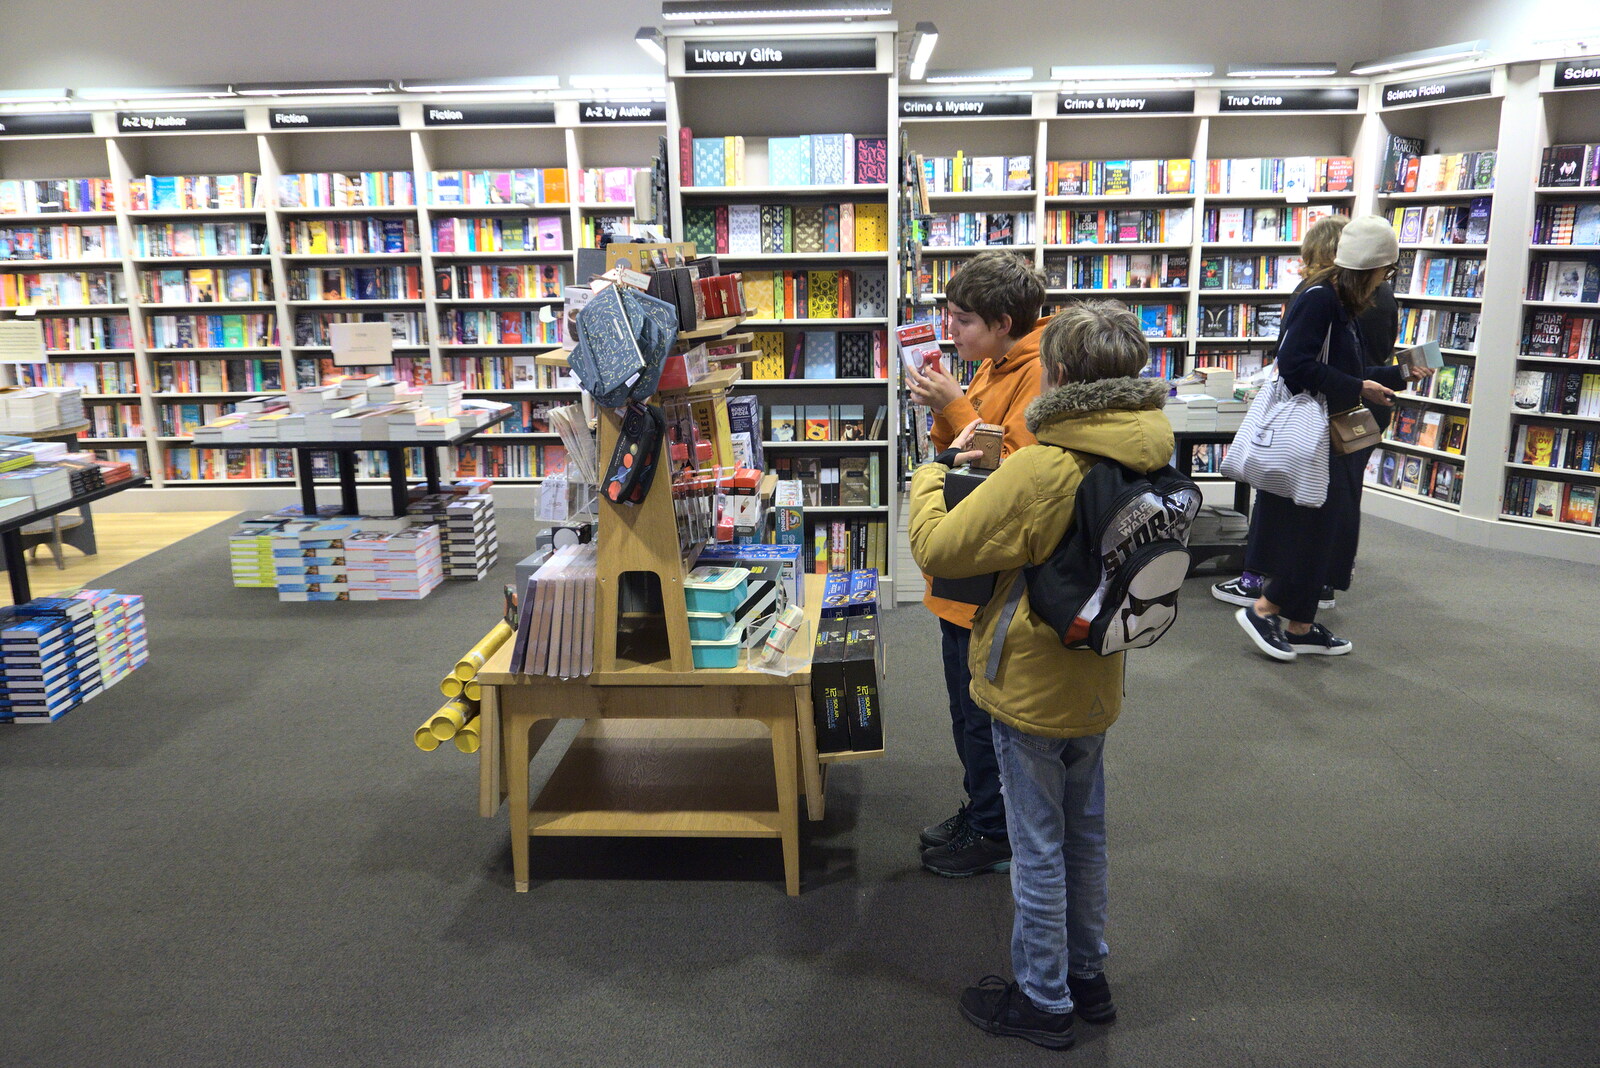 Pizza and Pasta in Bury St. Edmunds, Suffolk - 30th October 2022: The boys look at new books in Waterstones